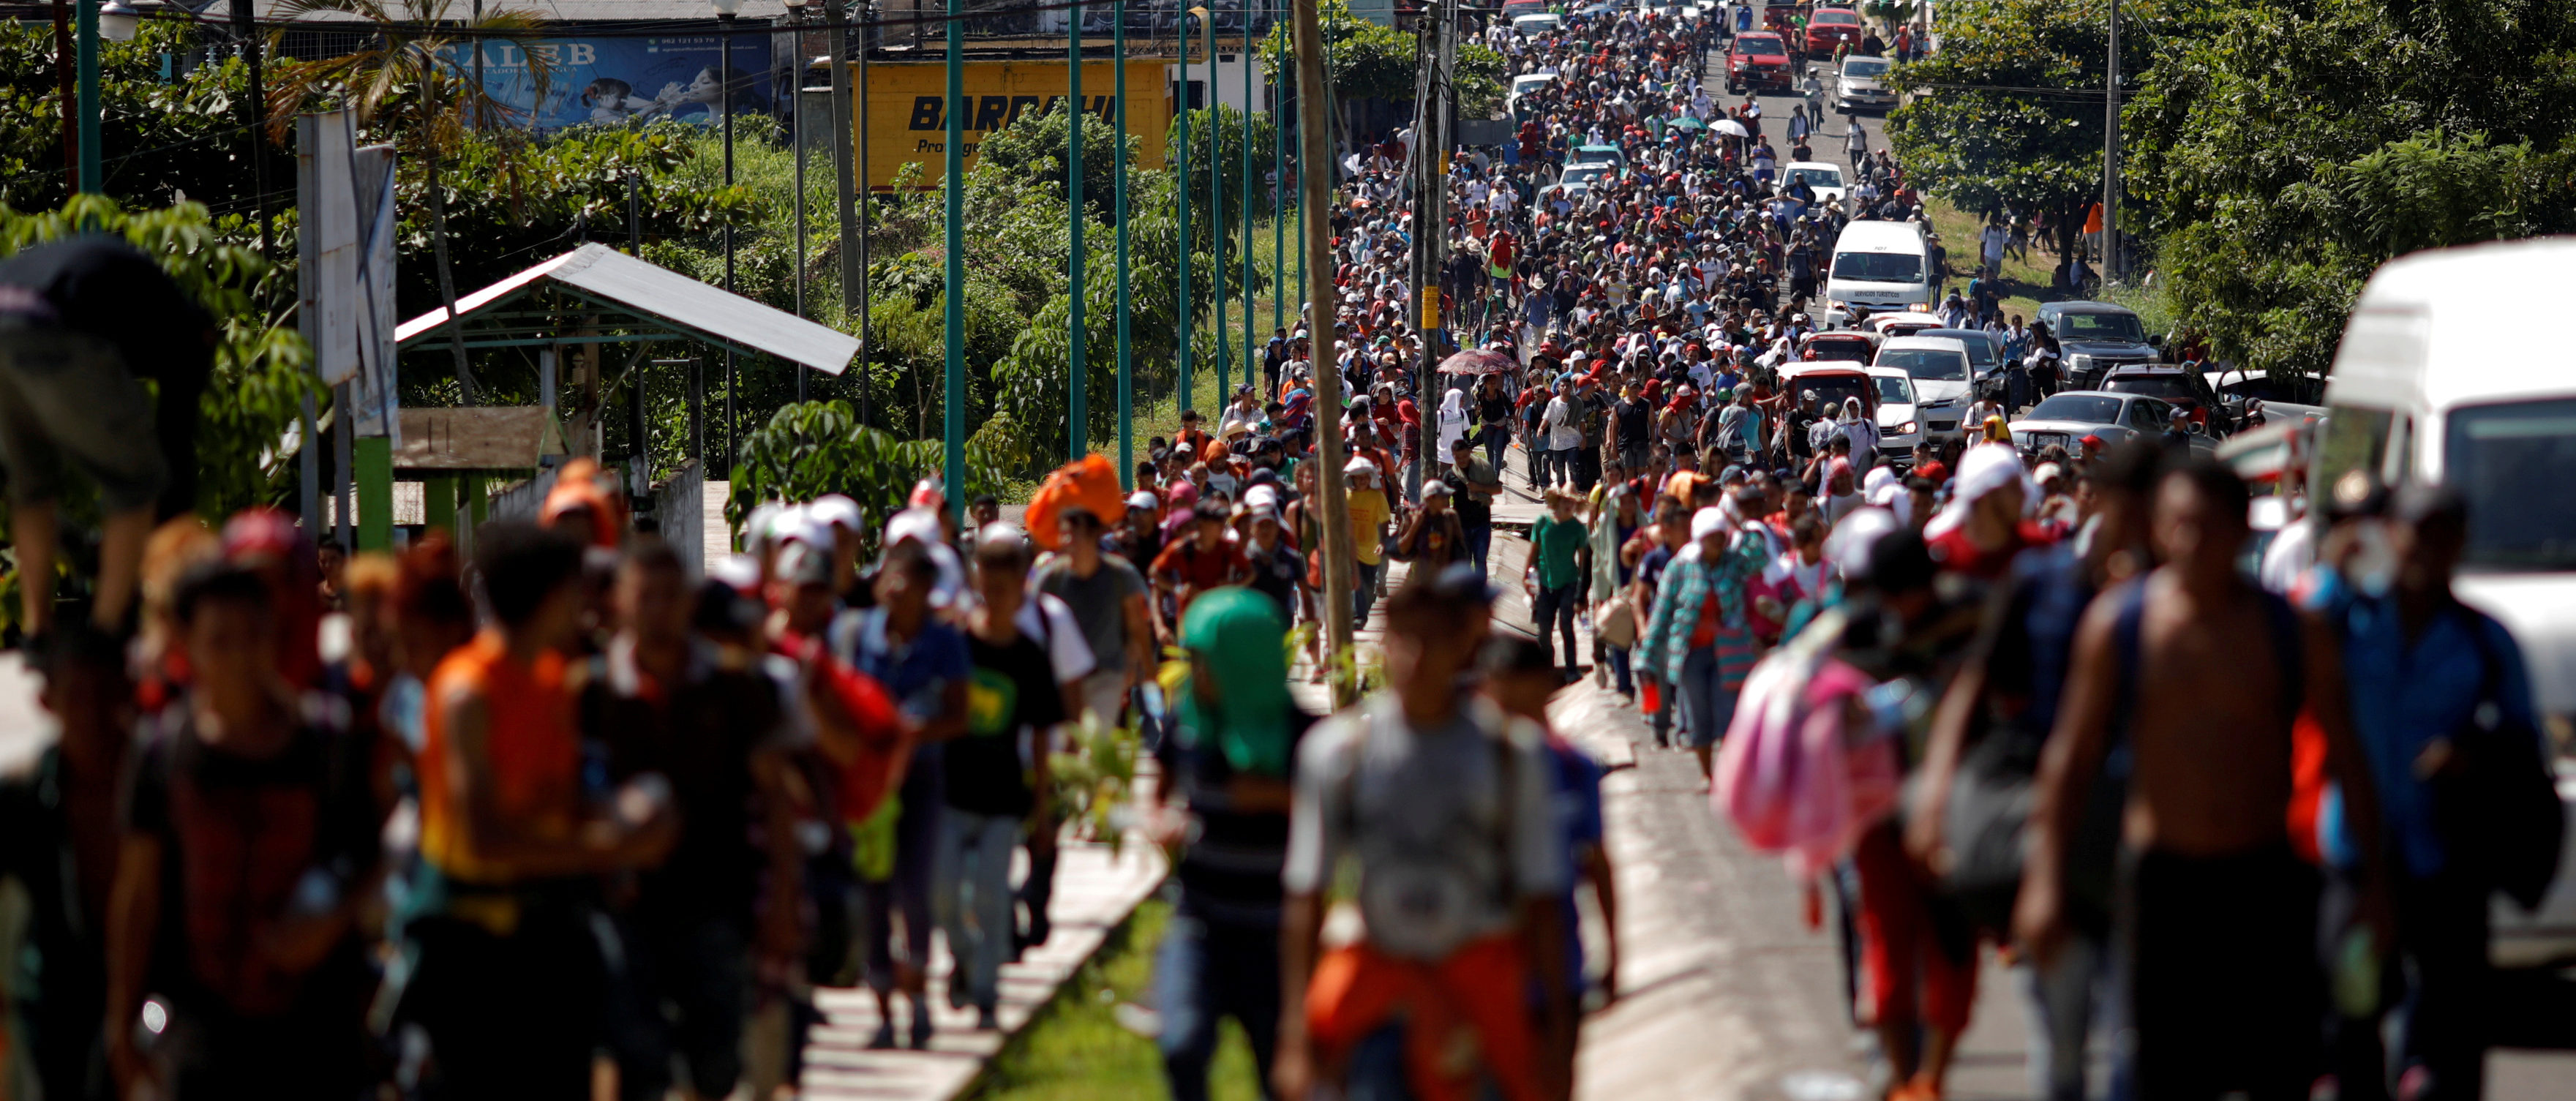 Central American migrants walk along the highway near the border with Guatemala, as they continue their journey trying to reach the U.S., in Tapachula